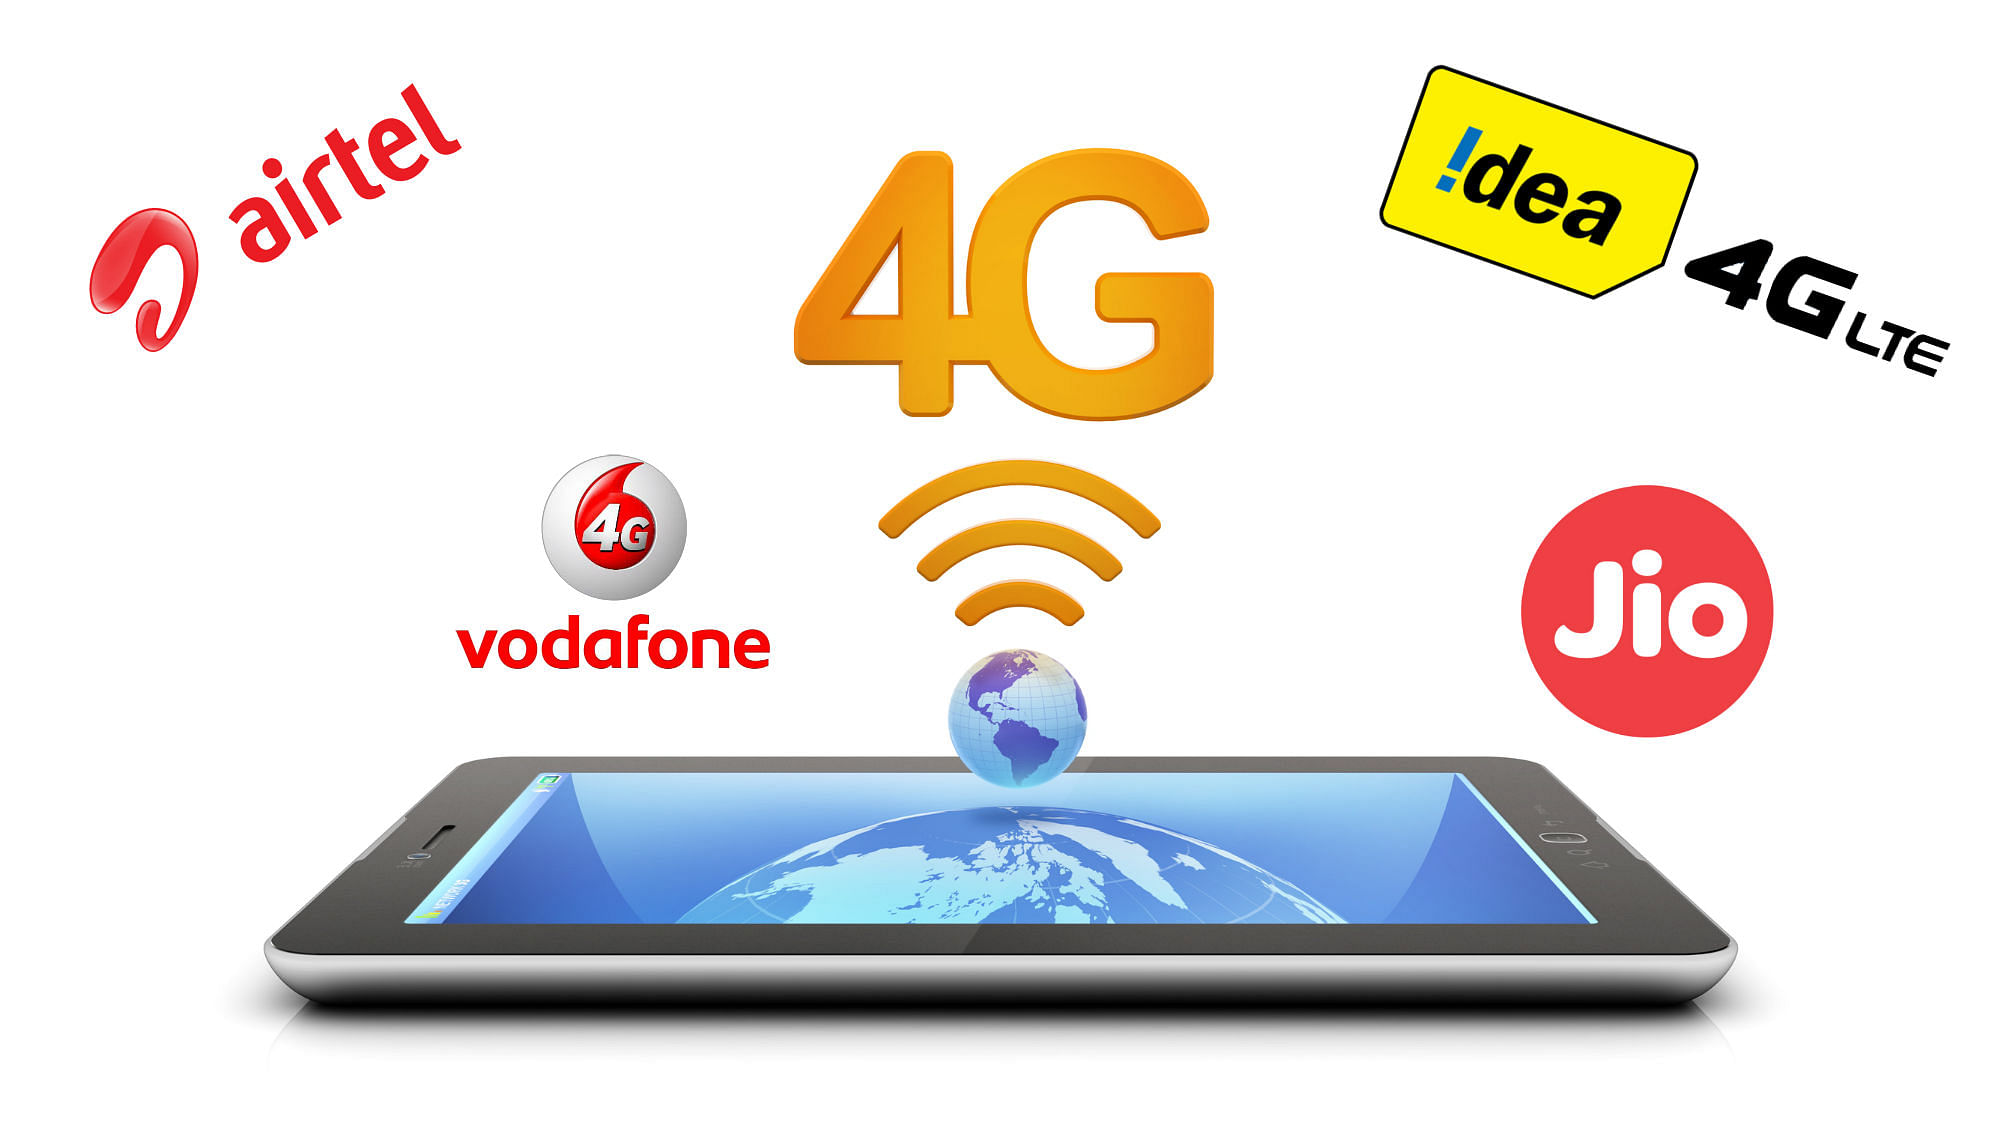 4G VoLTE is the future of telecom in India. 